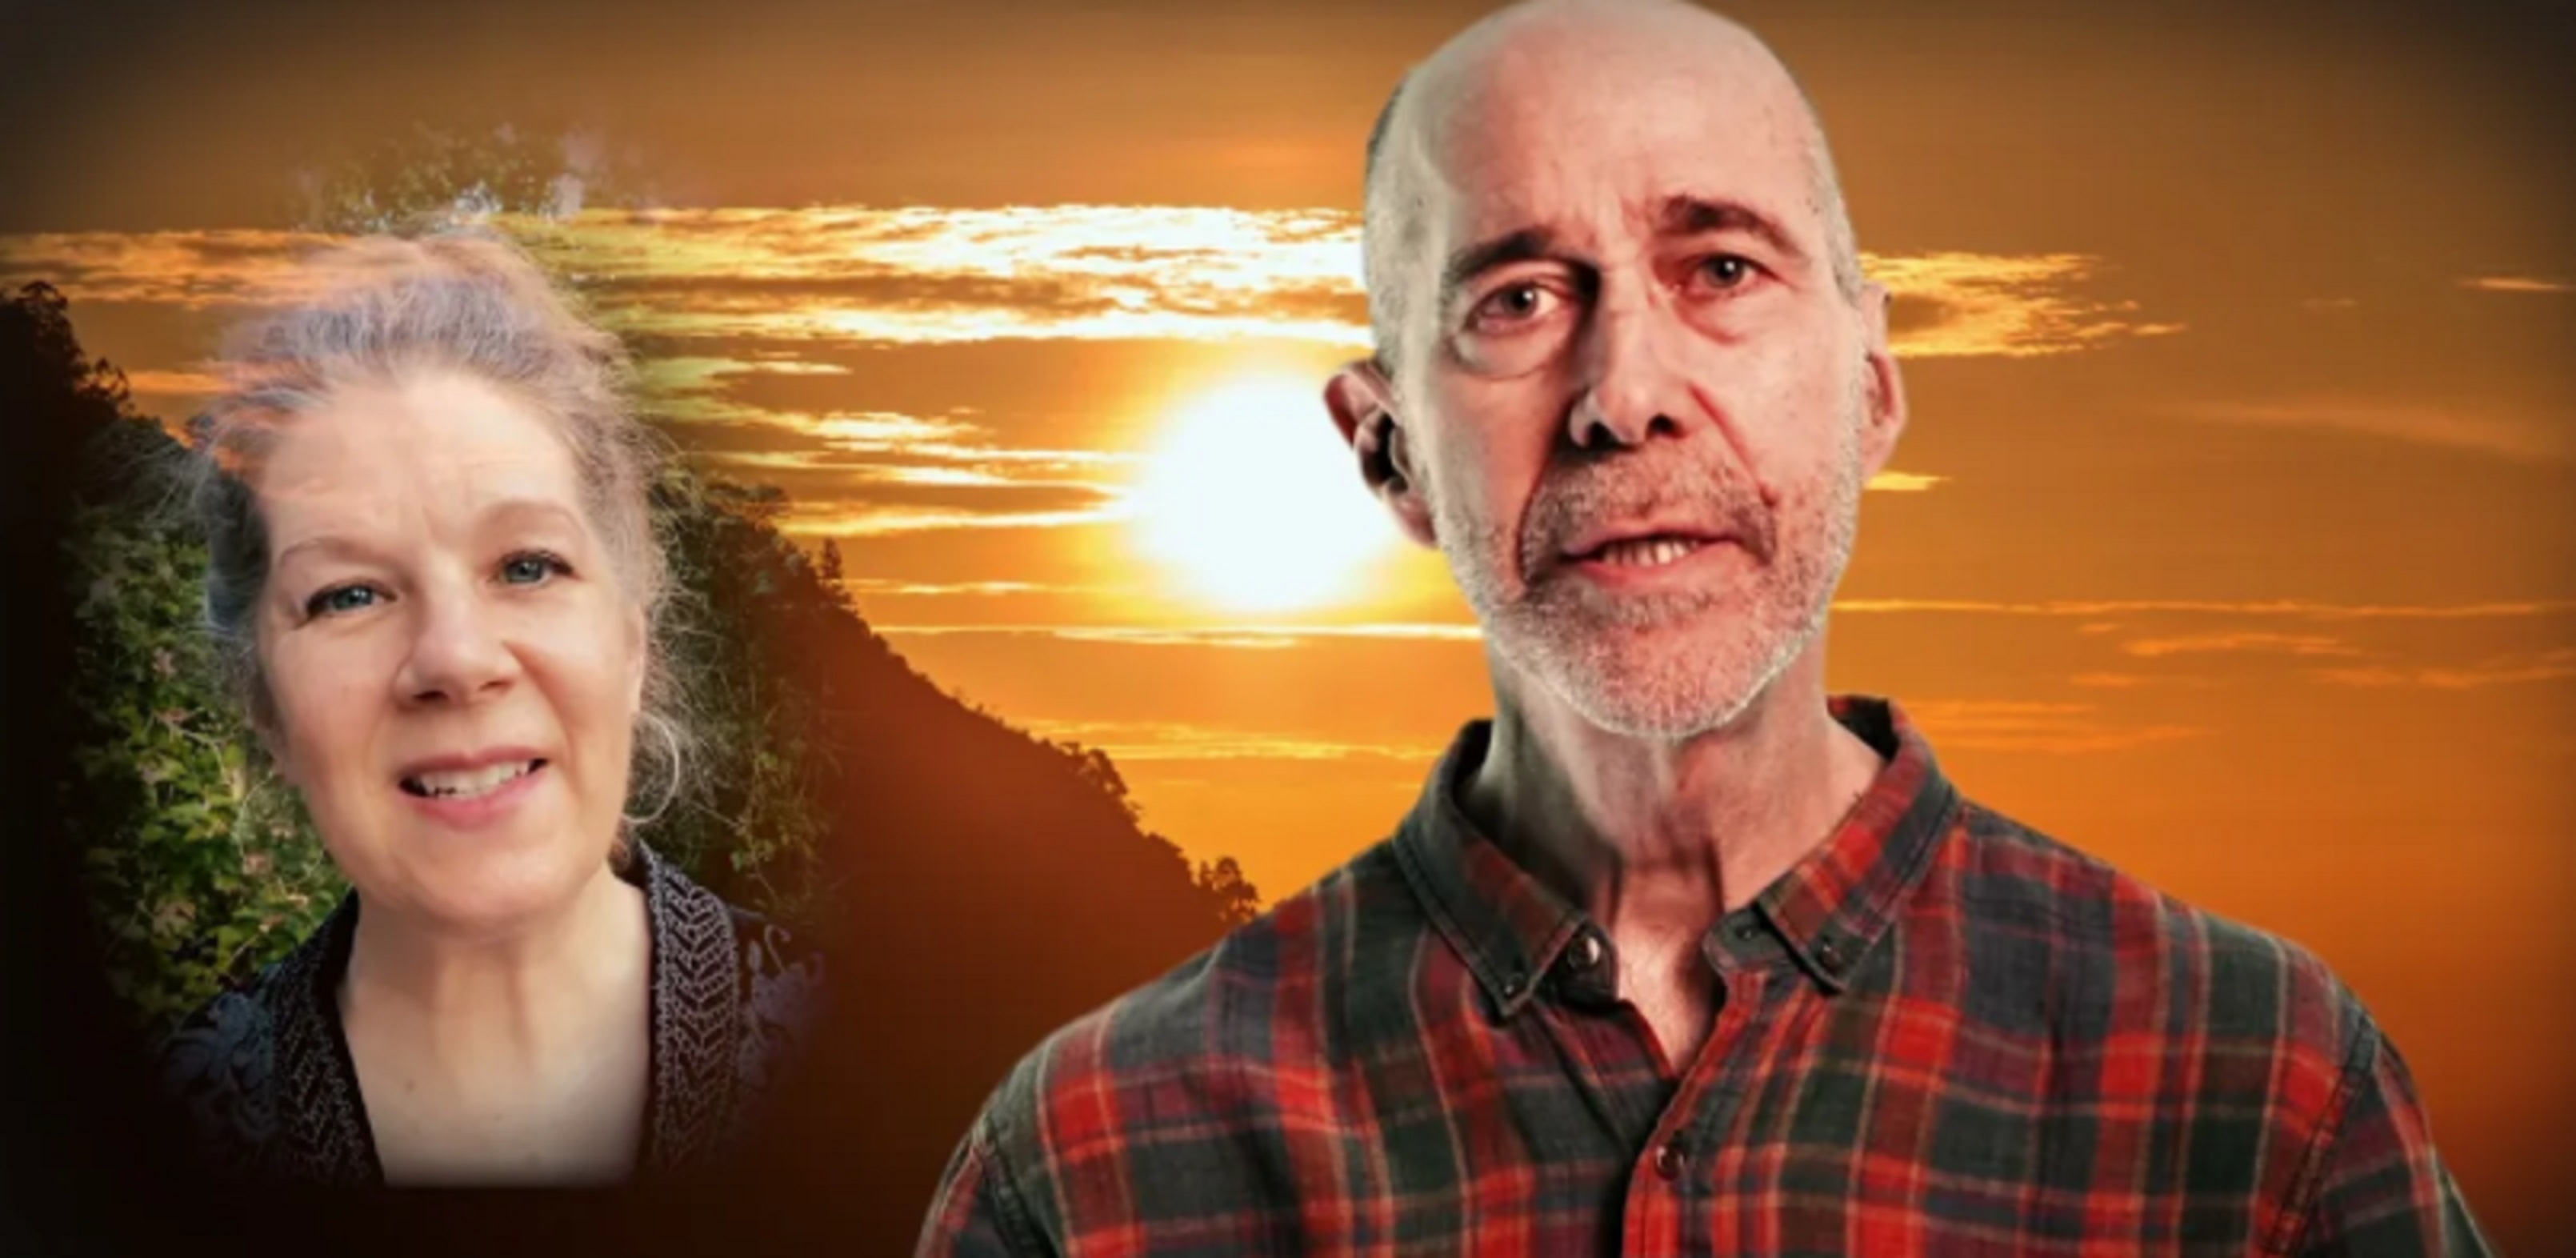 “Save the Monarch”: New Video from John Hall featuring Dar Williams Just Released